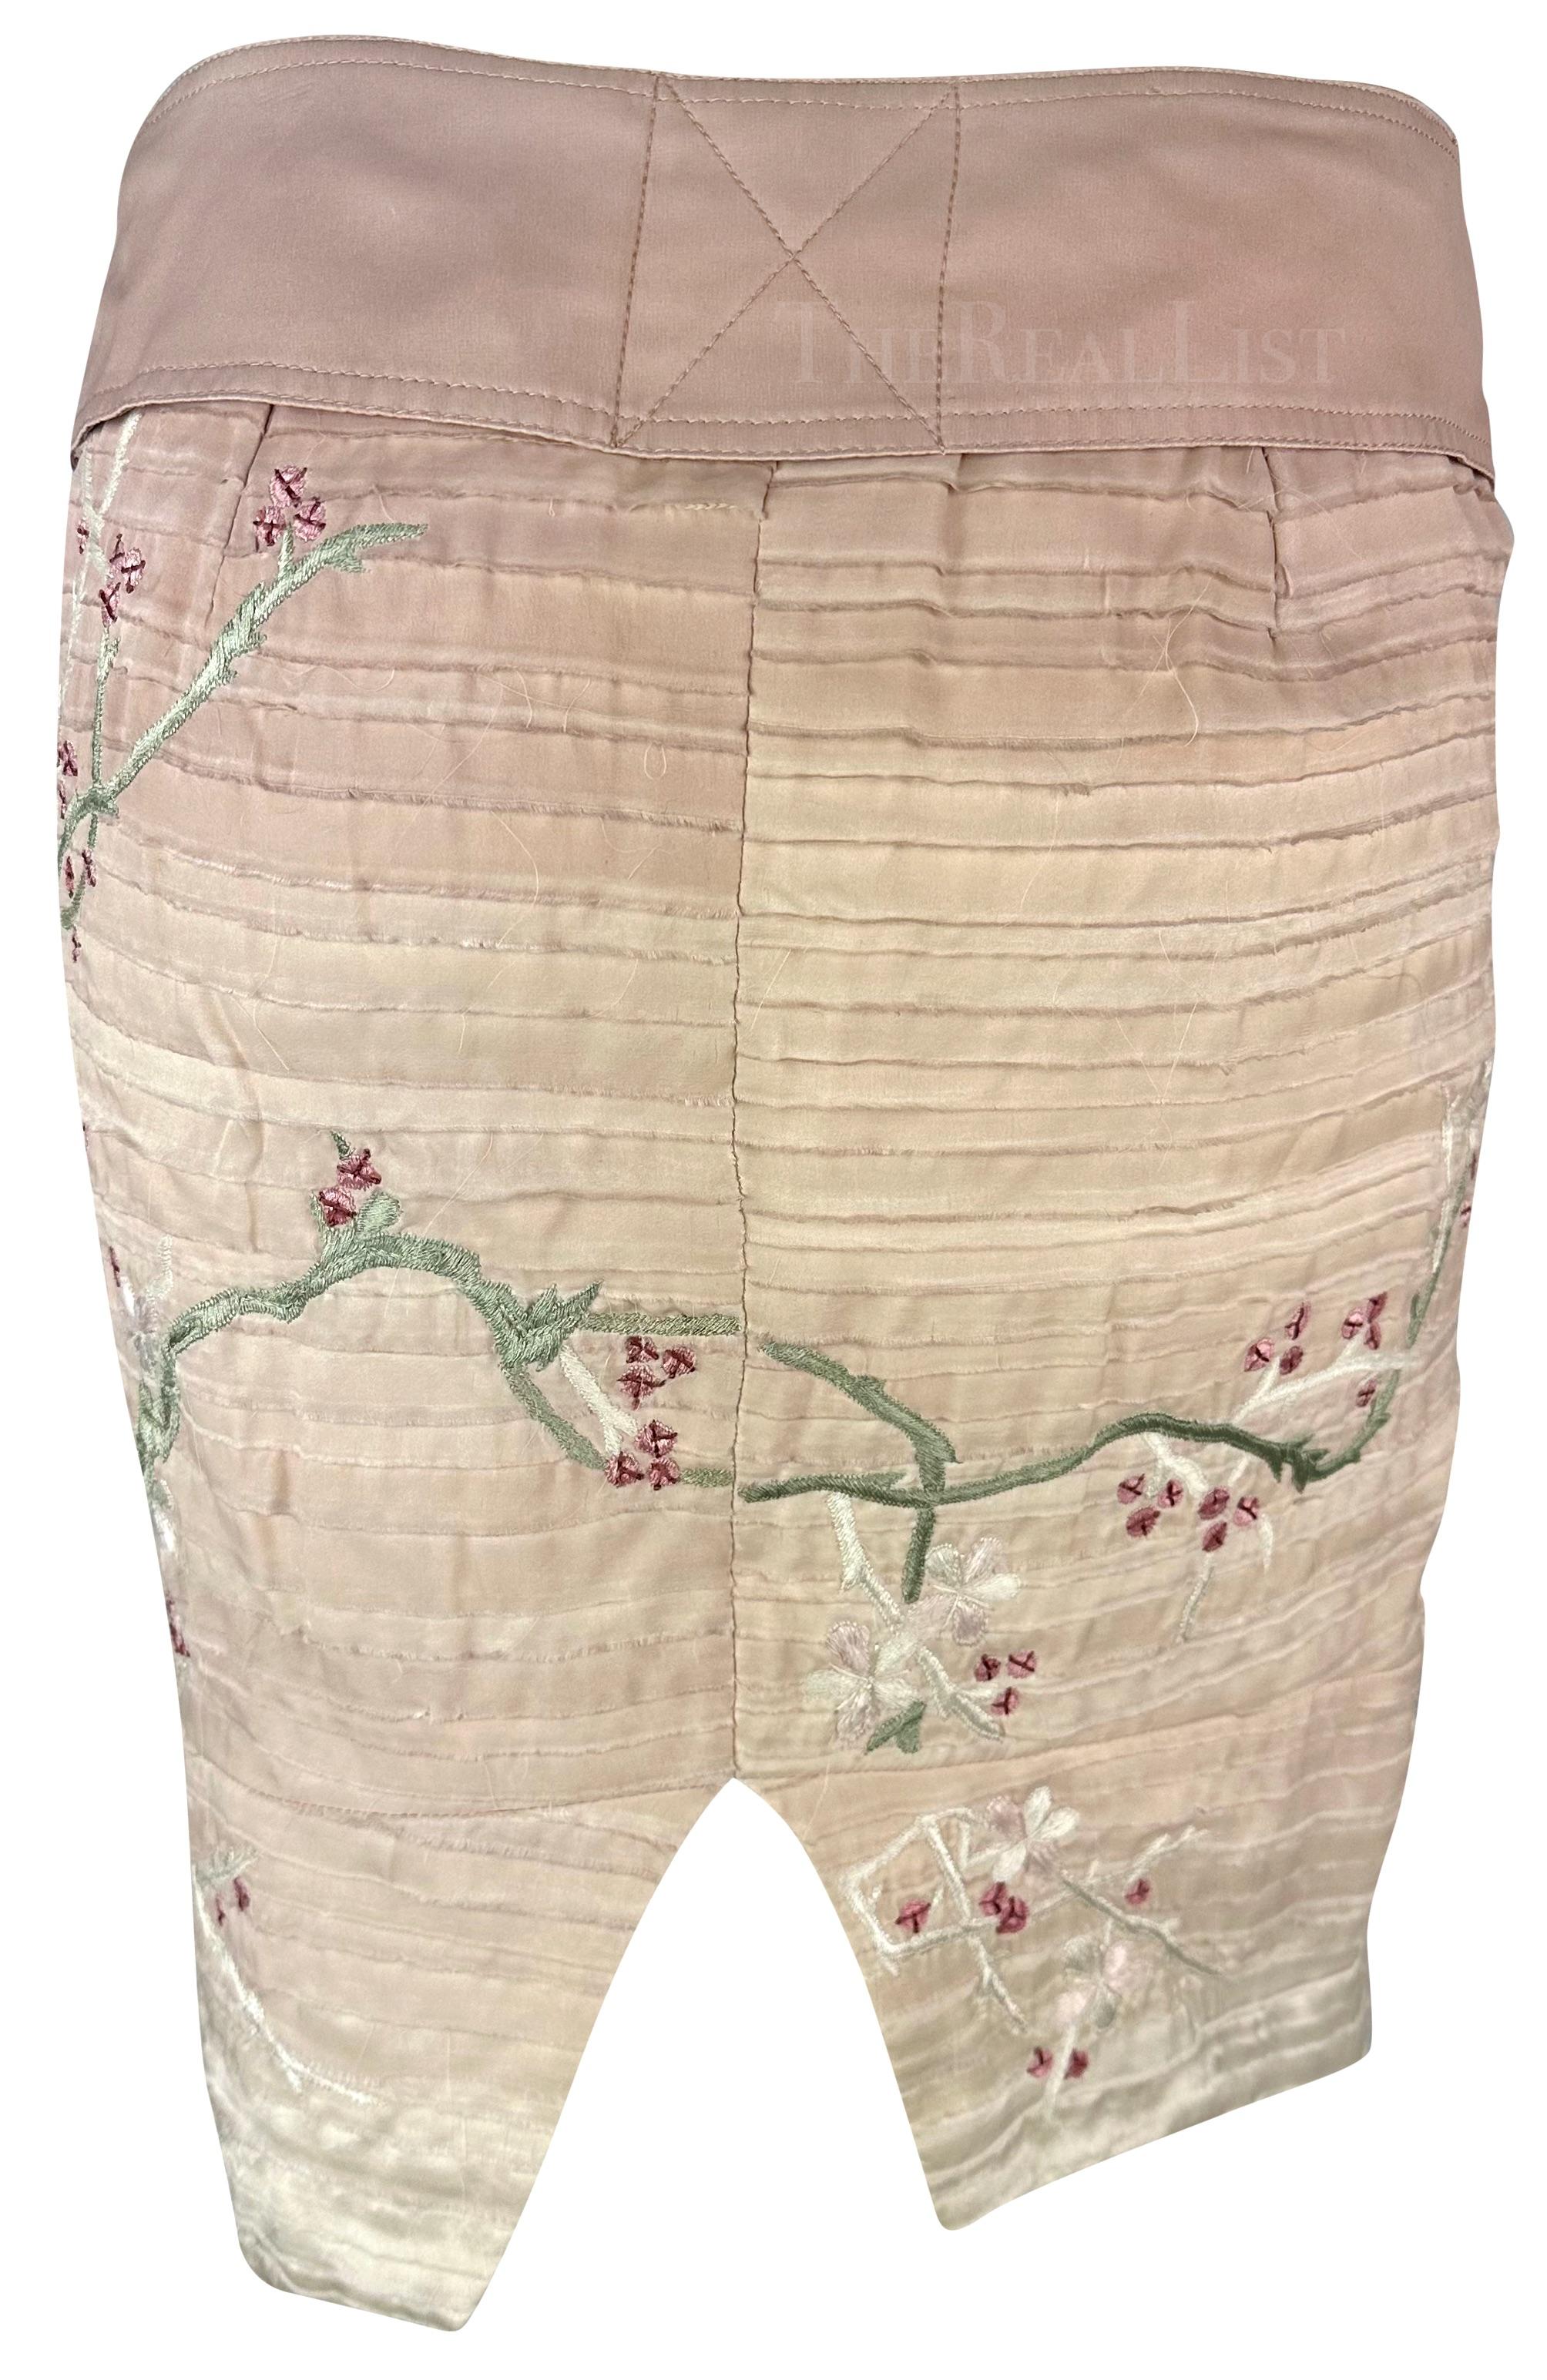 S/S 2003 Gucci by Tom Ford  Light Pink Cherry Blossom Embroidered Mini Skirt For Sale 4